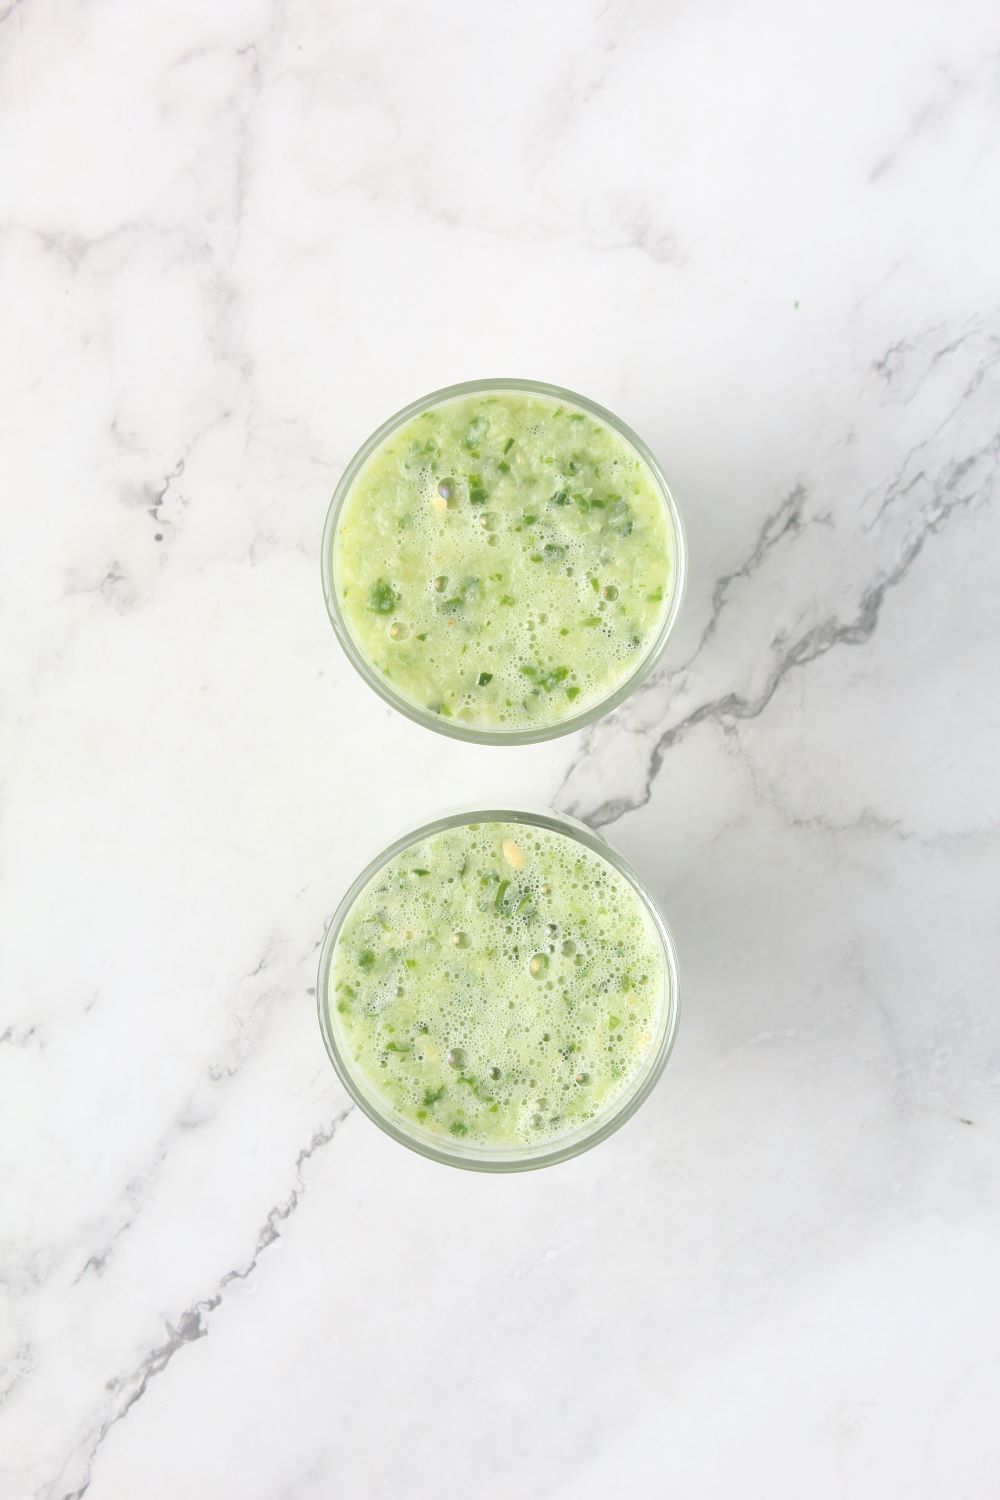 Two servings of Cucumber Pineapple Smoothie